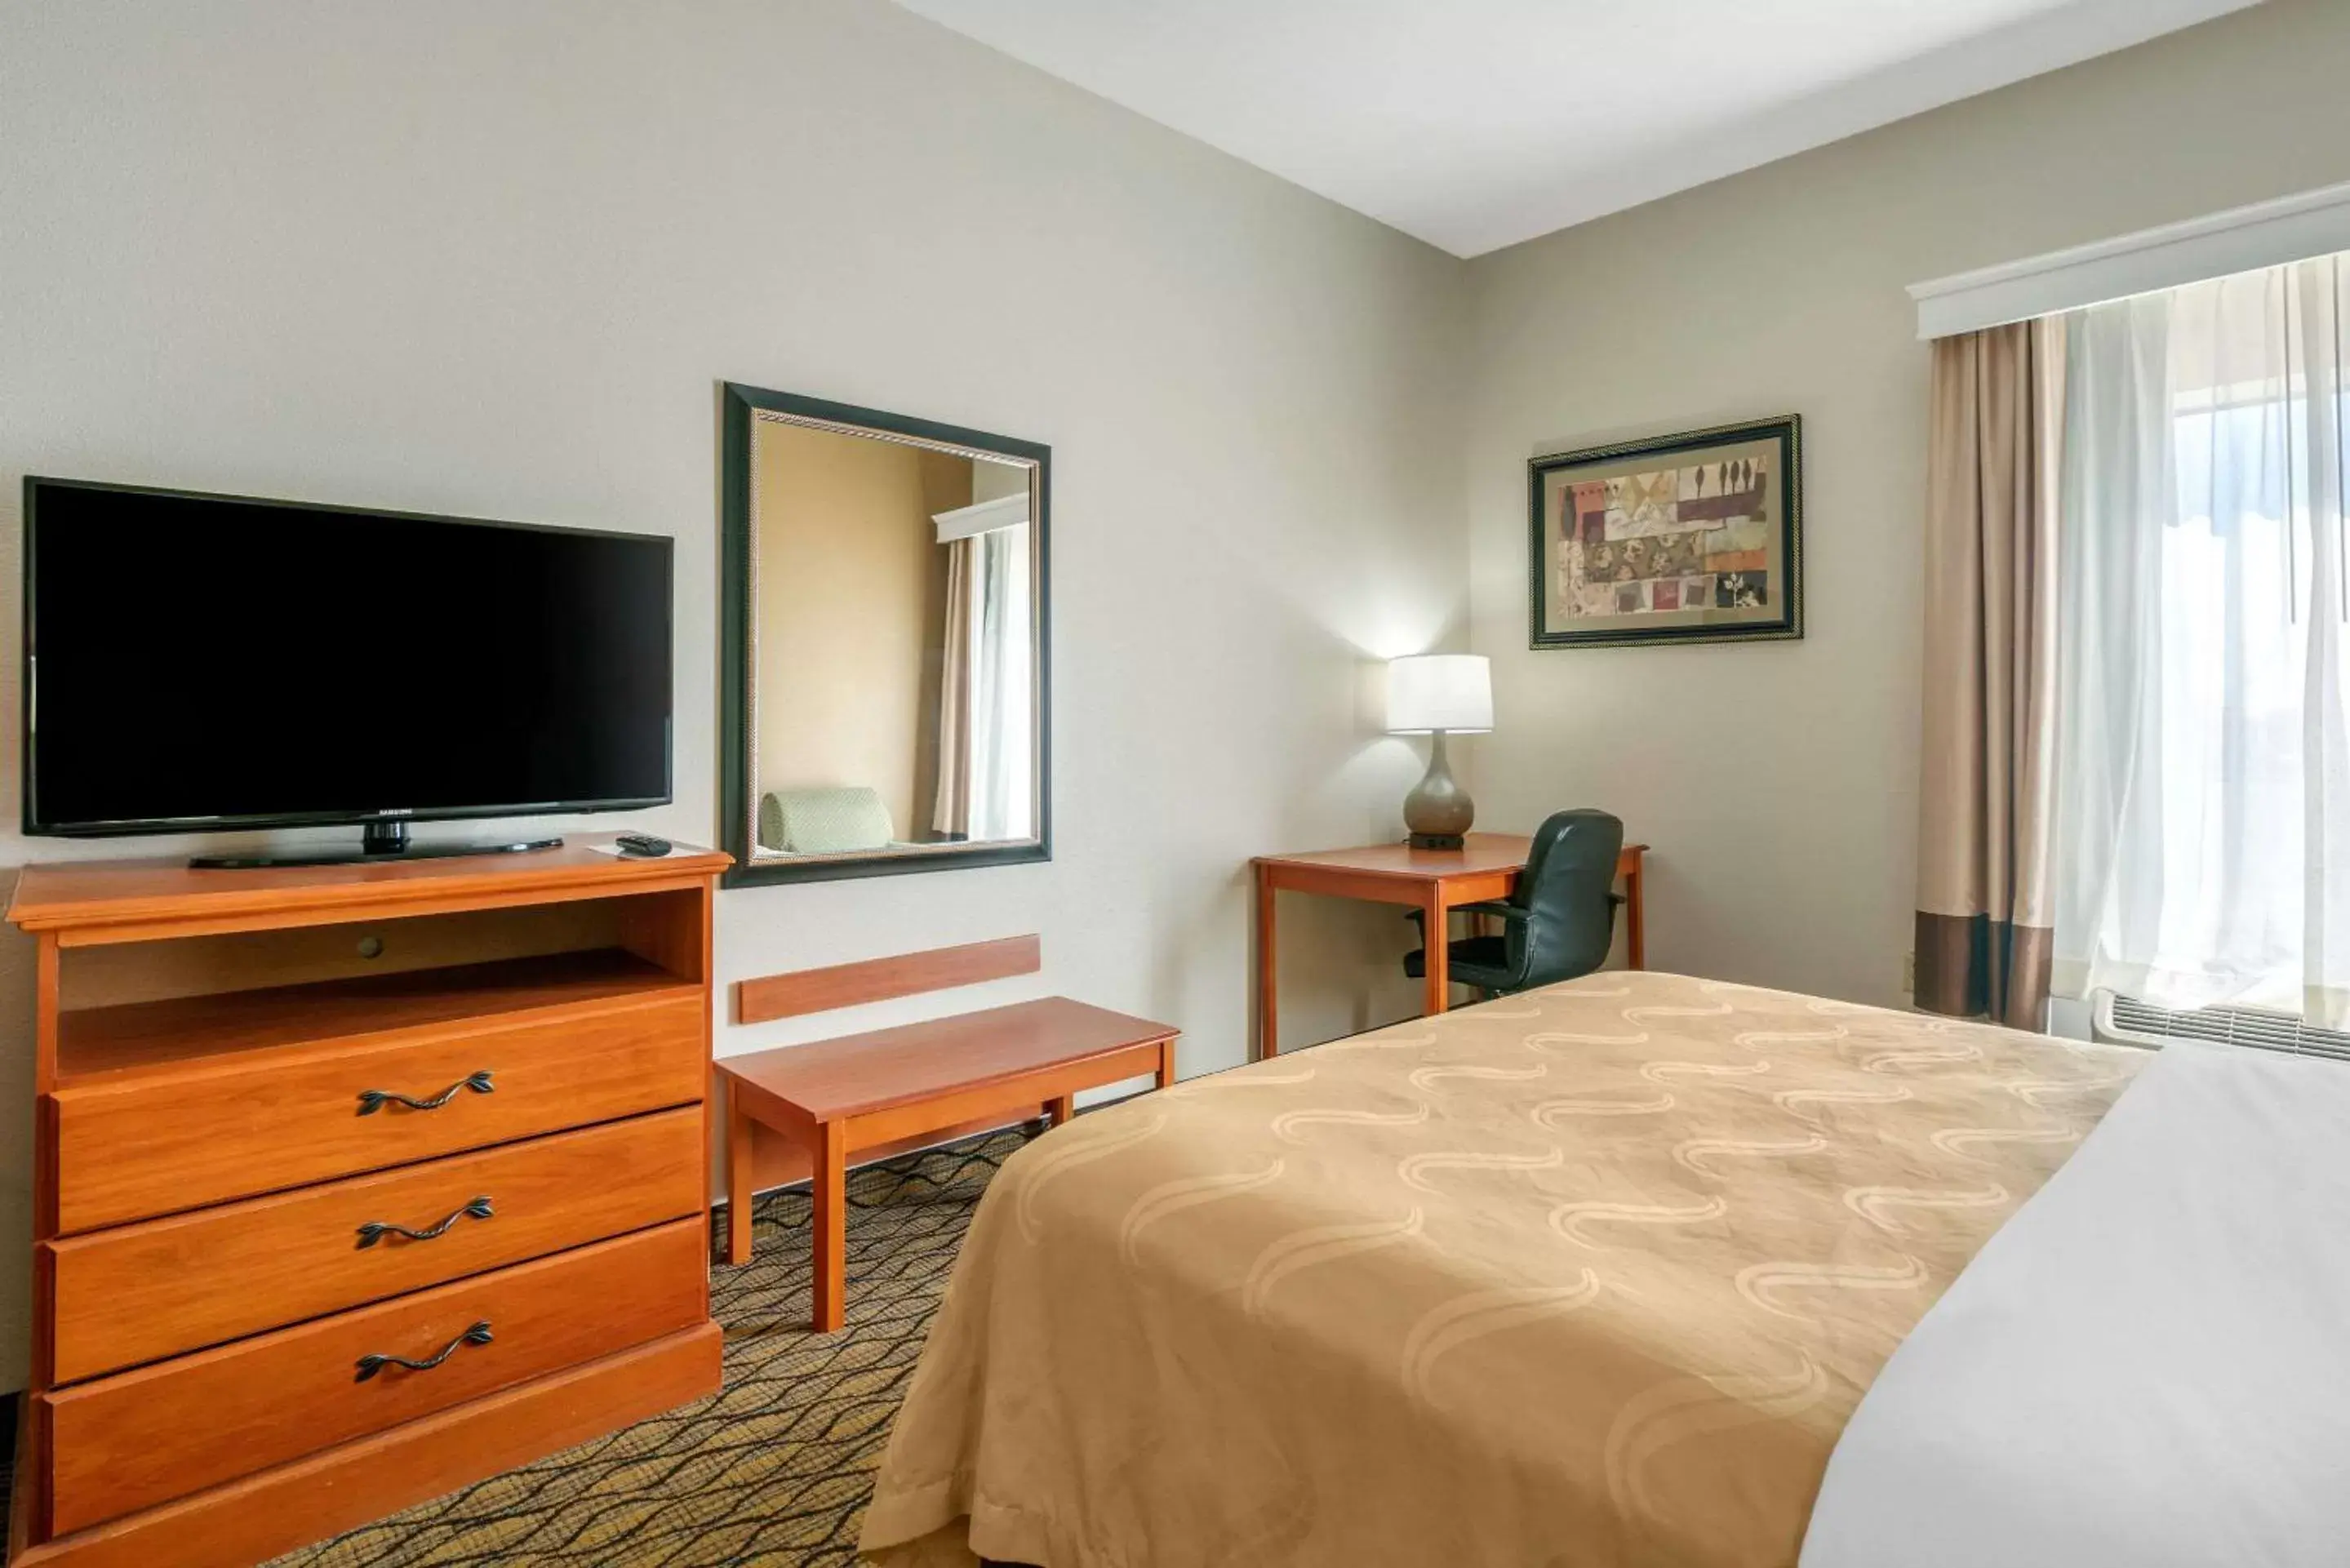 TV and multimedia, Bed in Quality Inn & Suites - Jefferson City